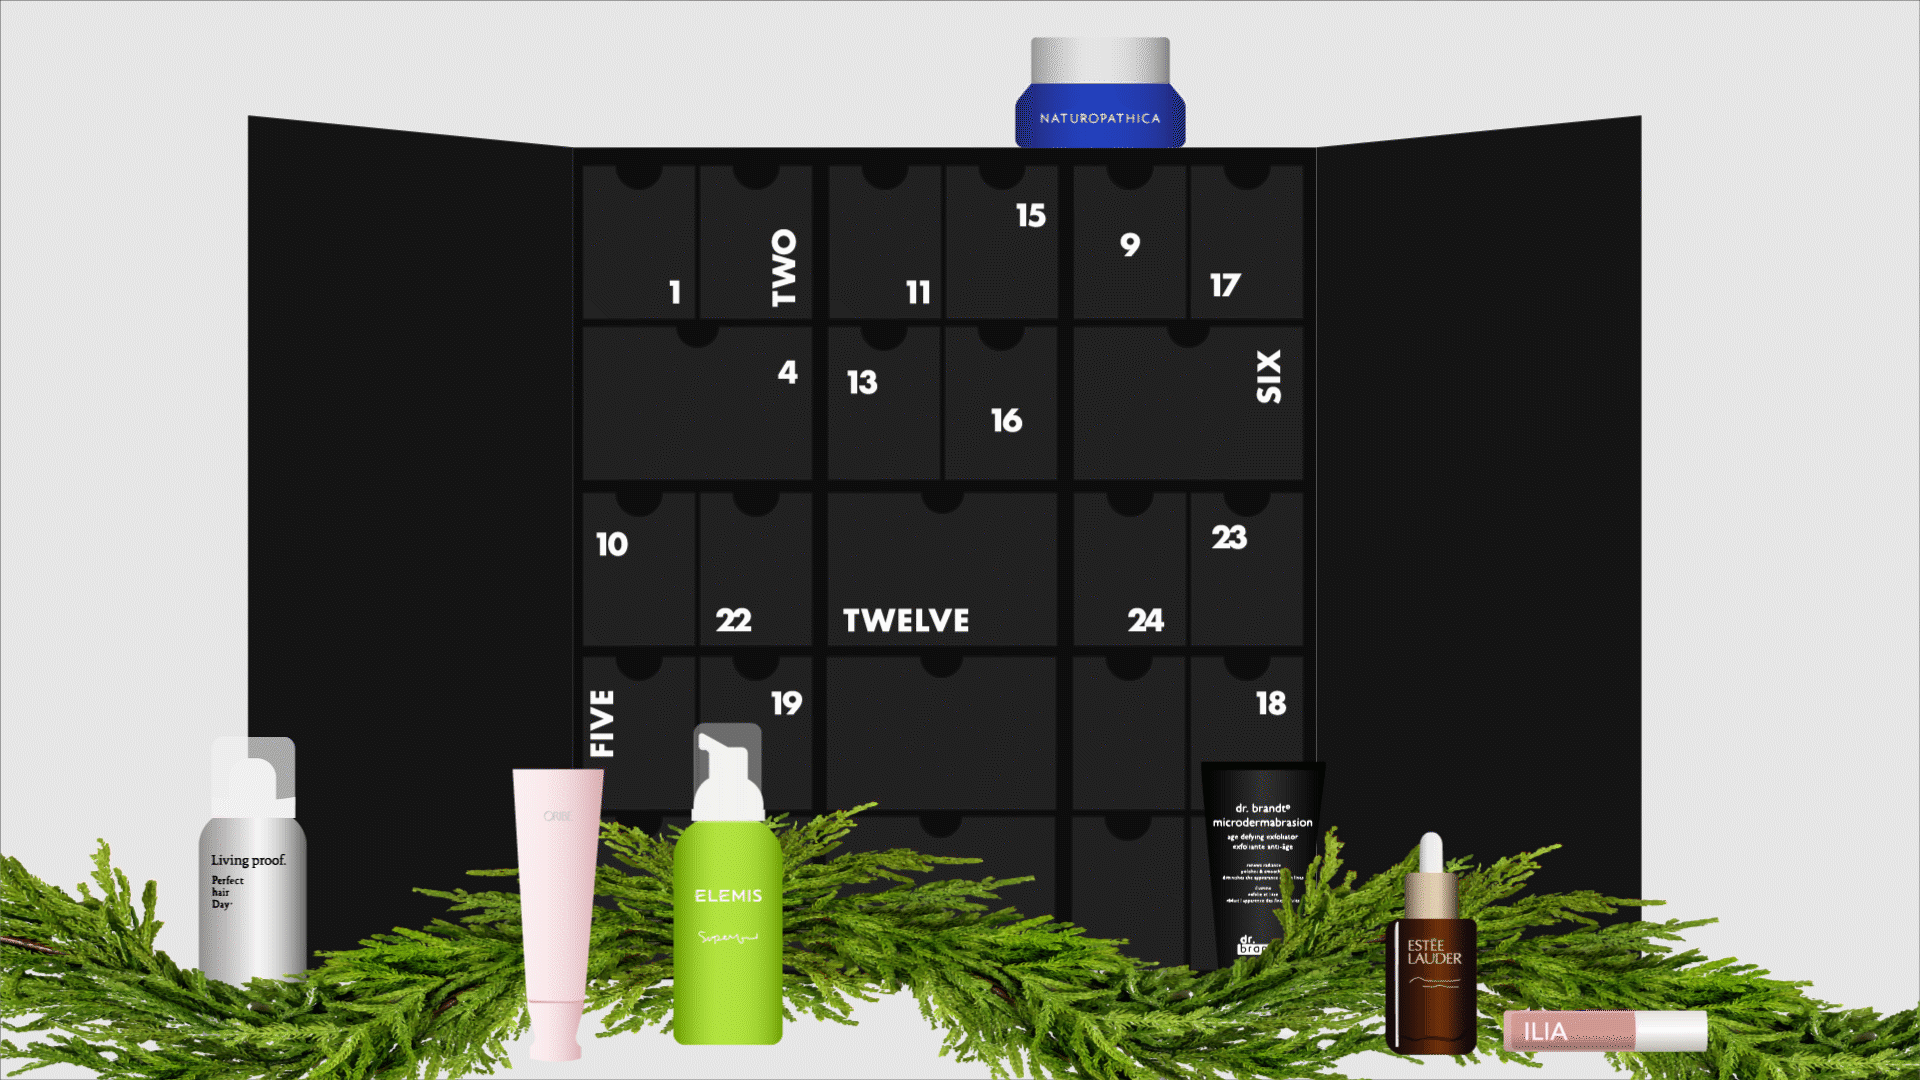 Dermstore Advent Calendar by Brittany Theophilus on Dribbble